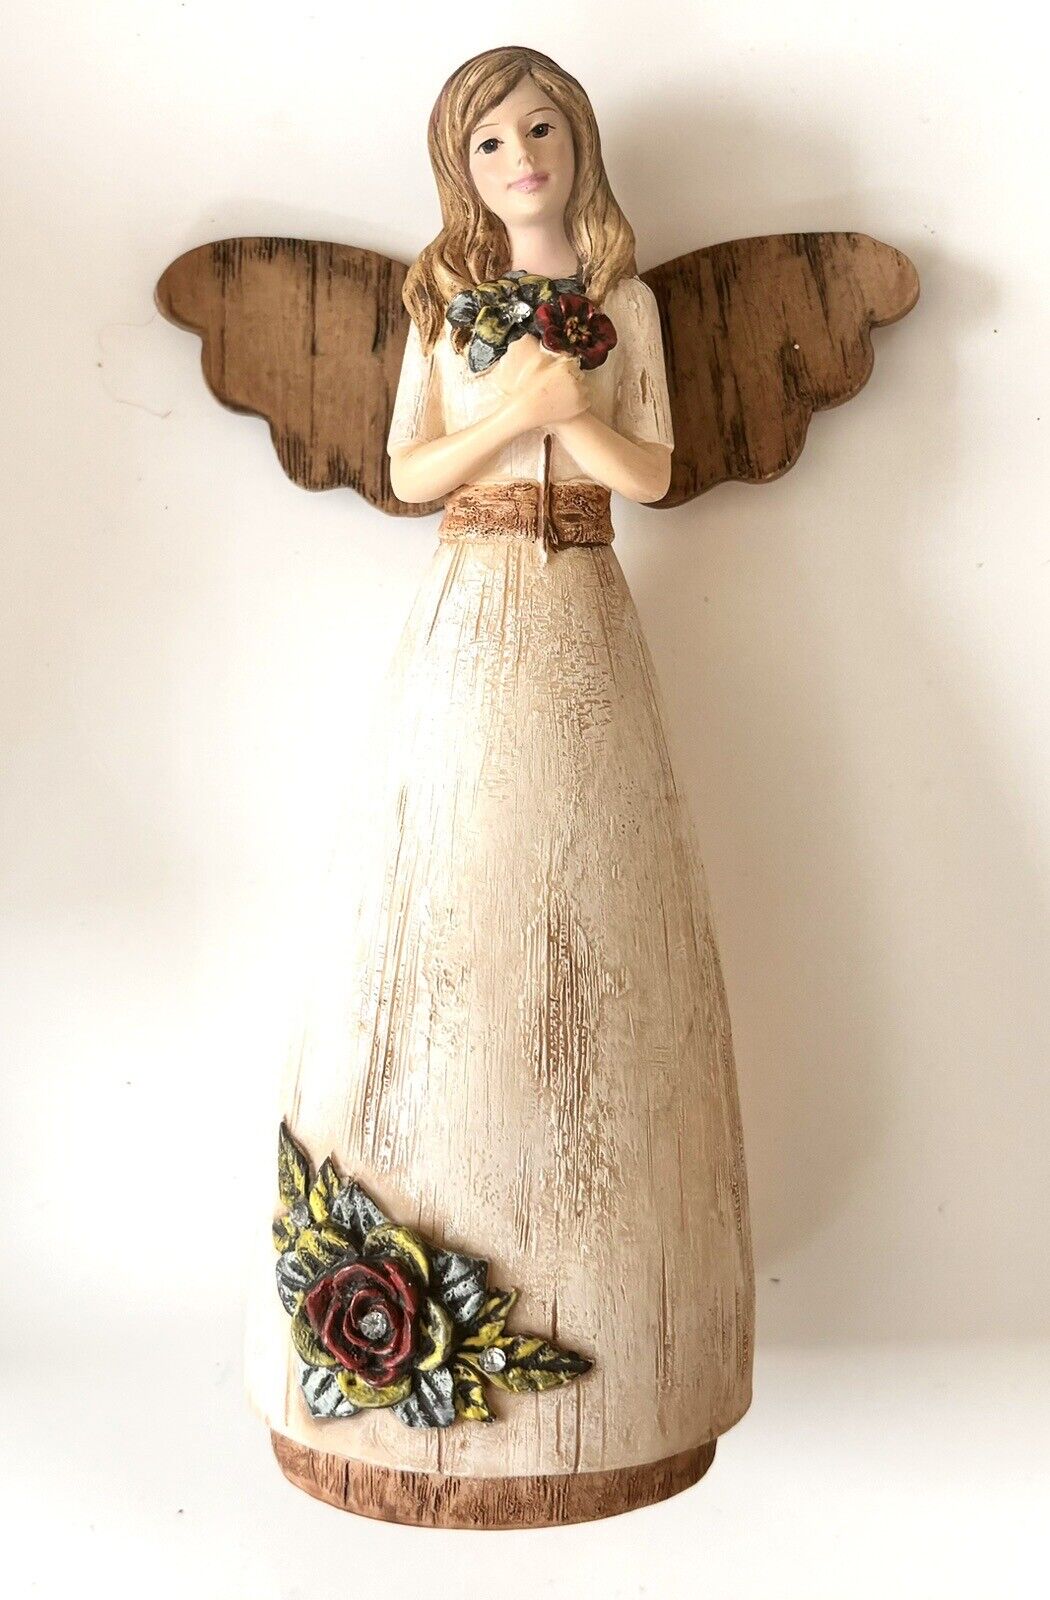 Simple Spirits by Pavilion Gift Company 2012 Daughter Figurine #41013